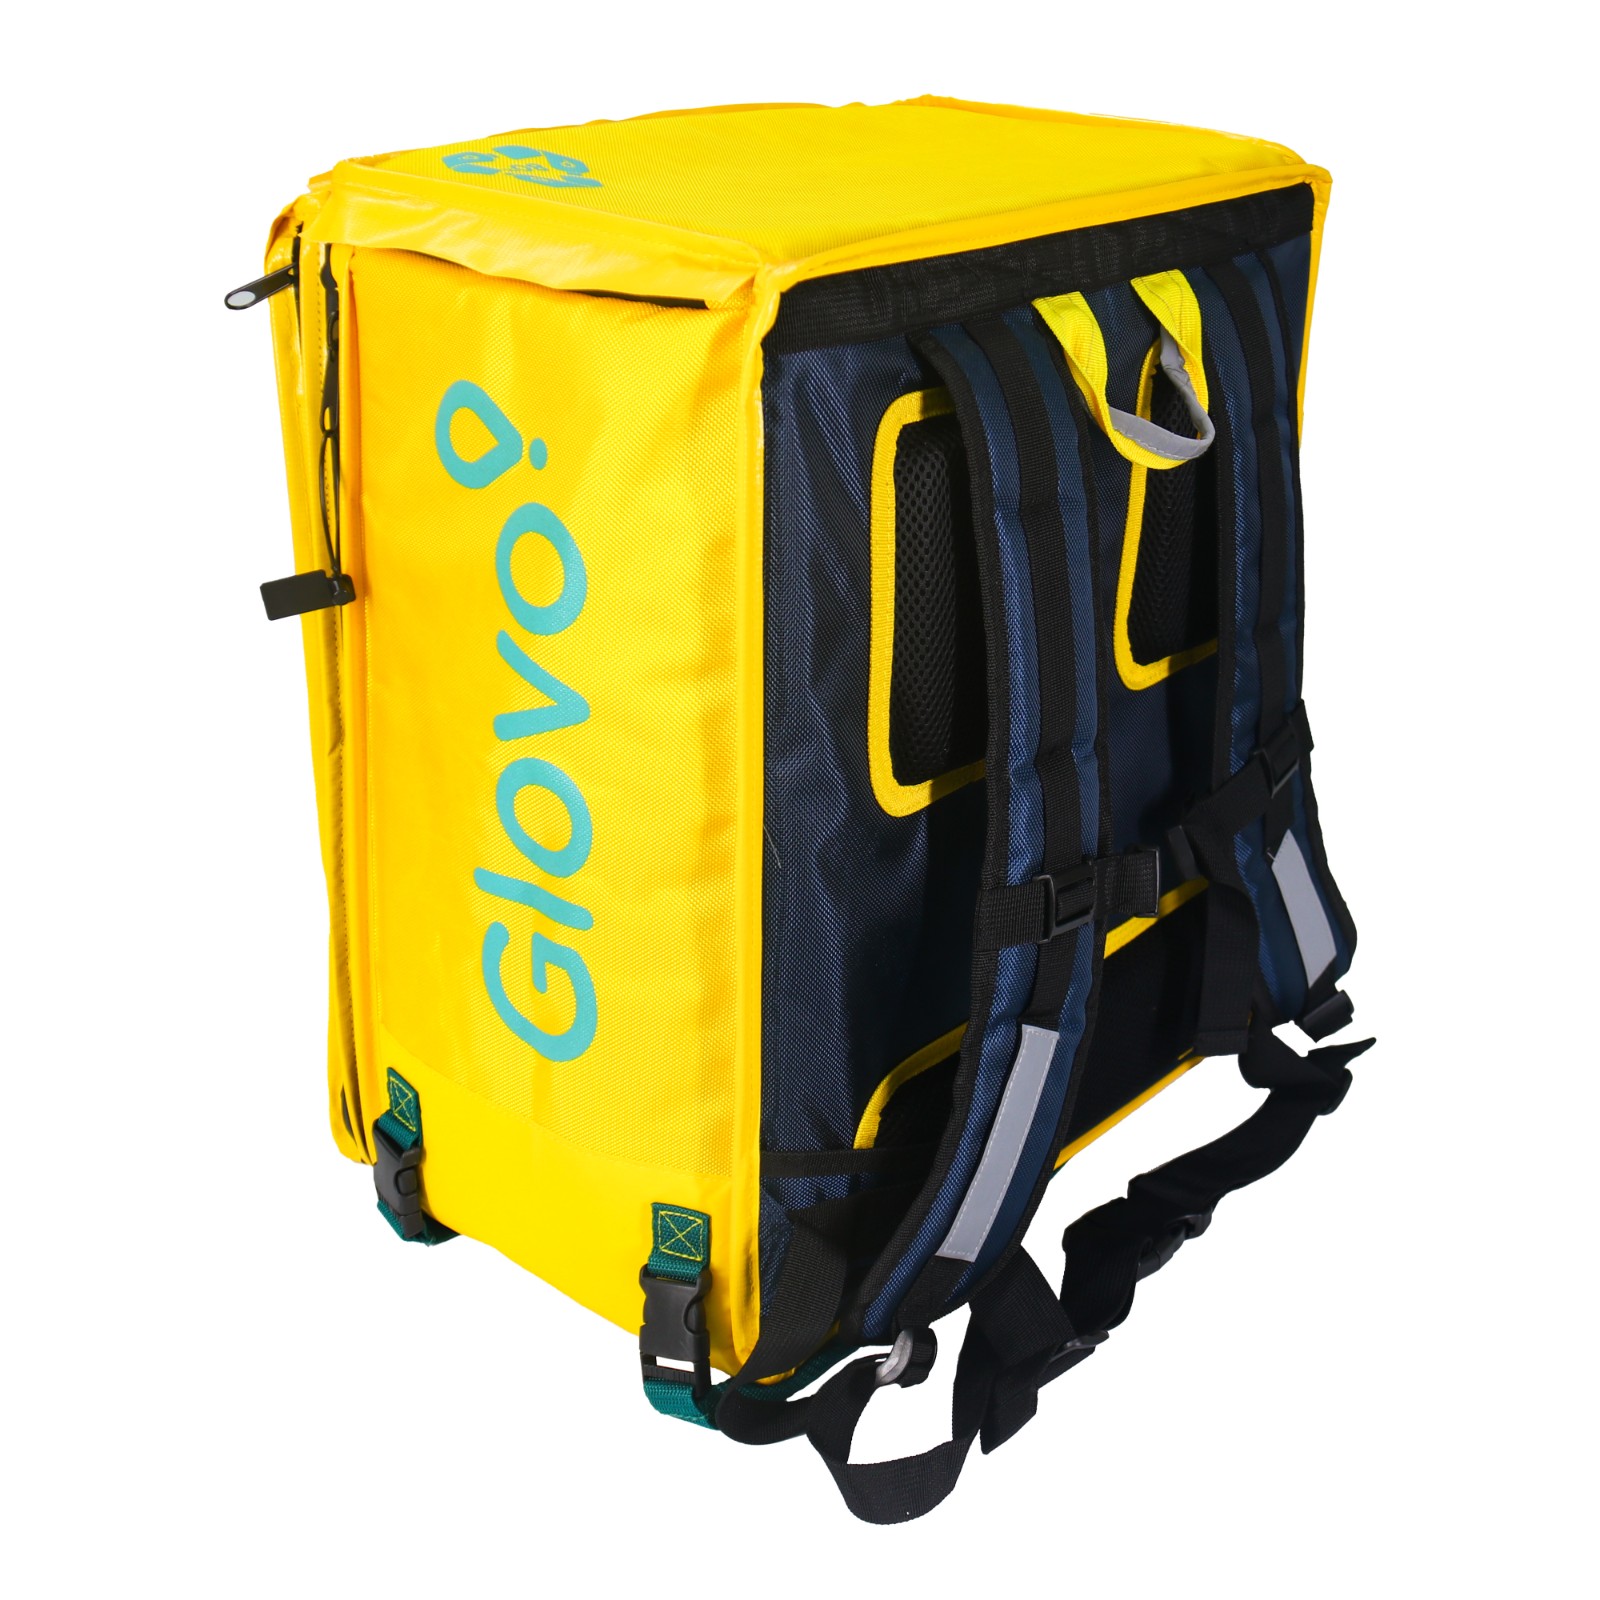 Thermal Glovo Classic Backpack for Motorbikes & Bikes - ACD-B-025 Ideal for Delivery